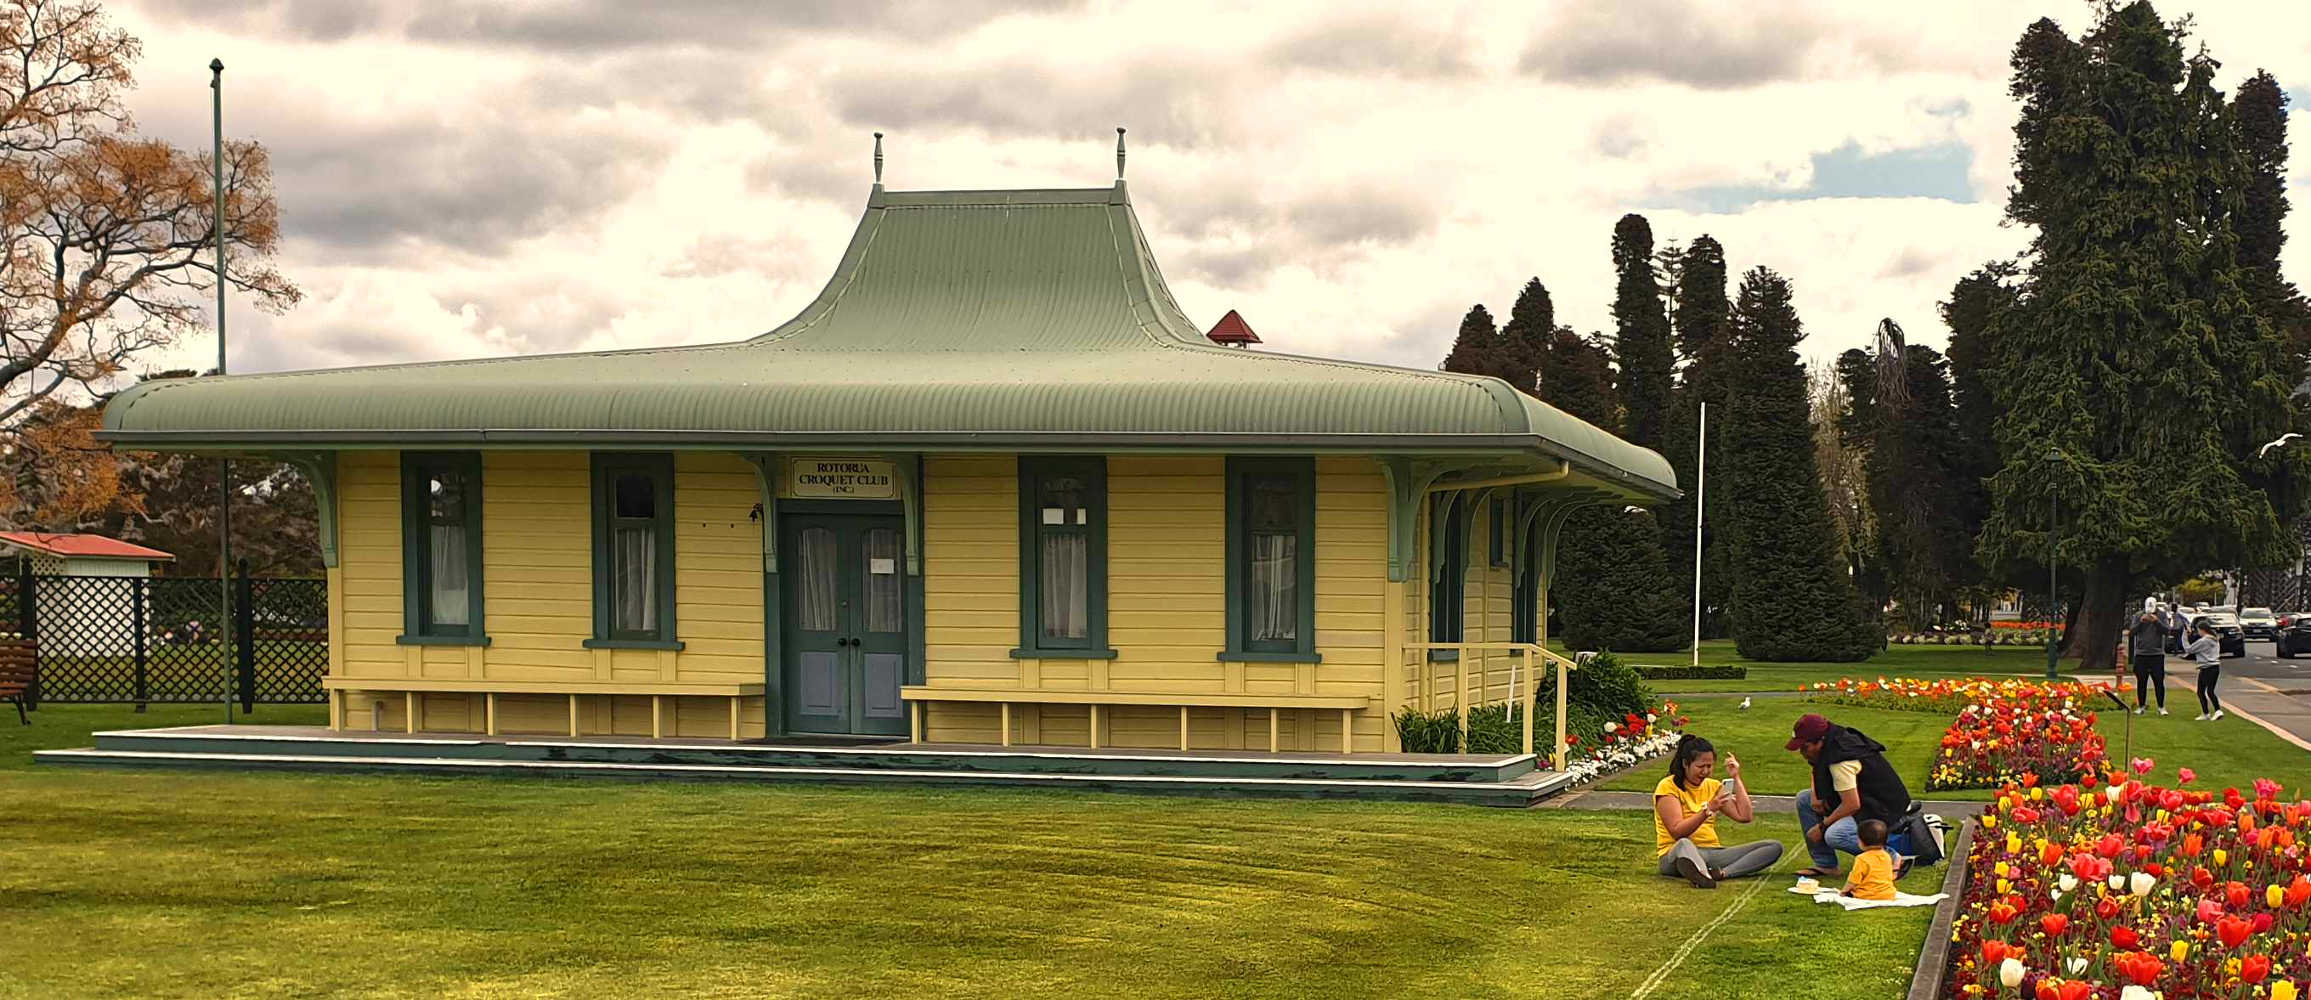 Government House Croquet House complete with baby selfie and tulips, Rotorua, New Zealand